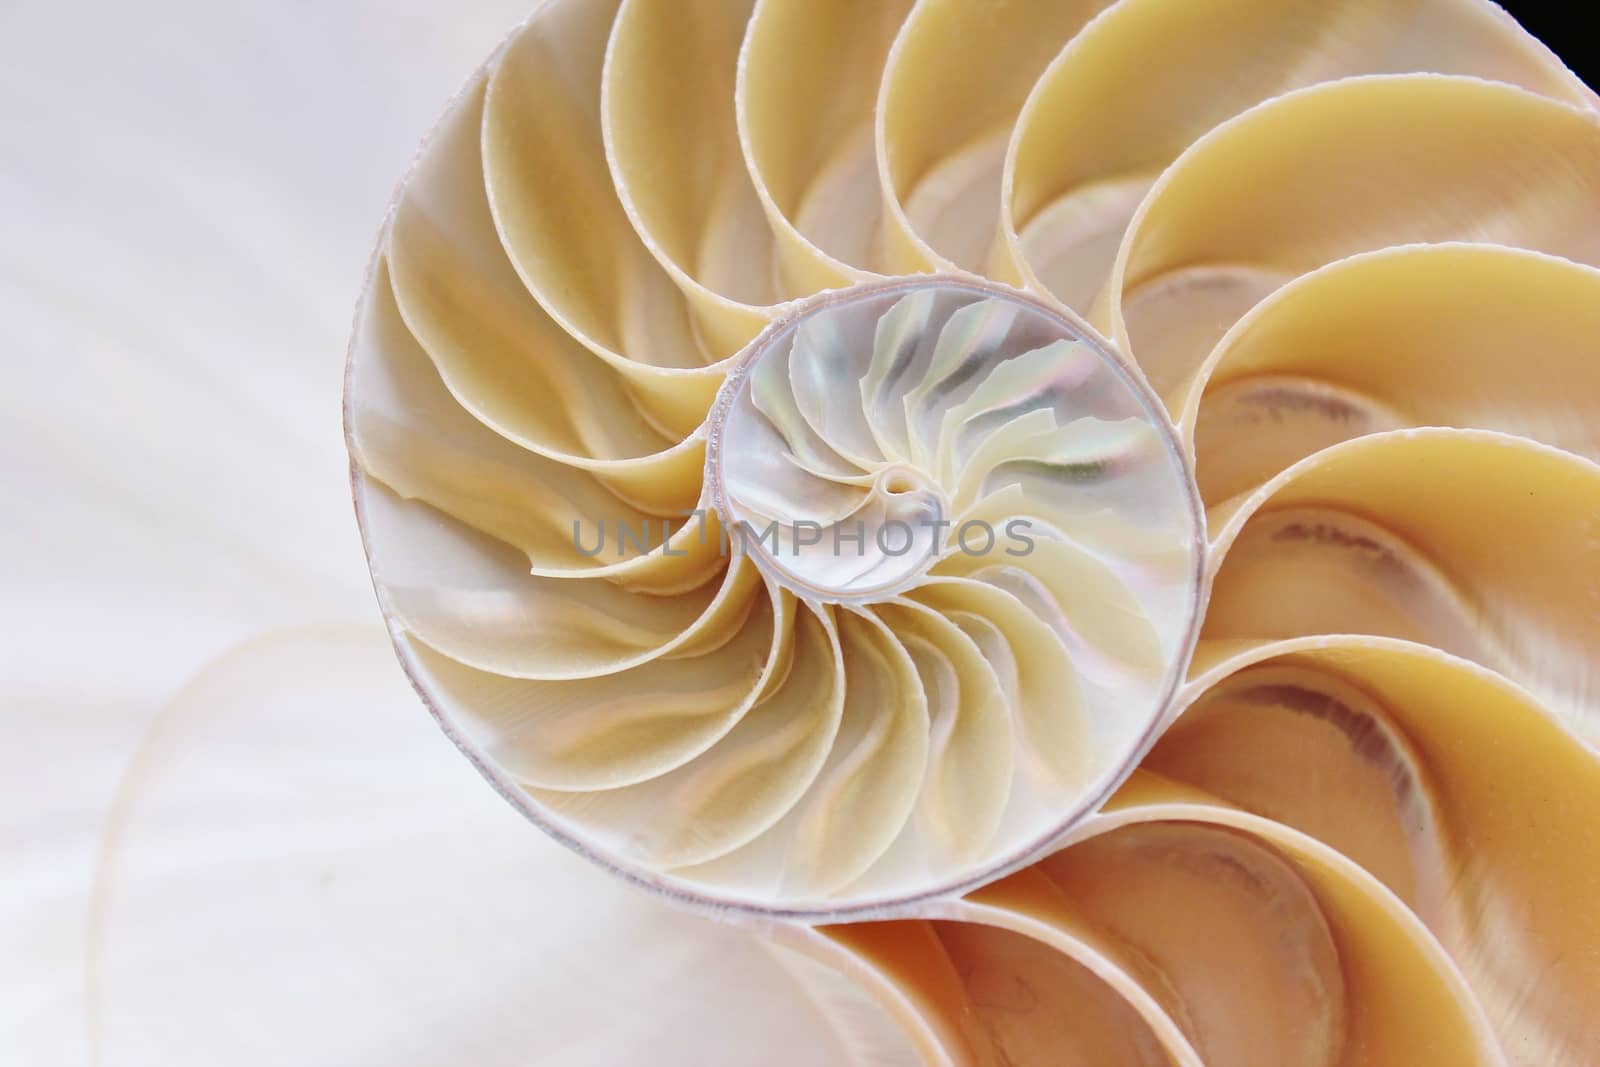 nautilus shell cross-section by cheekylorns